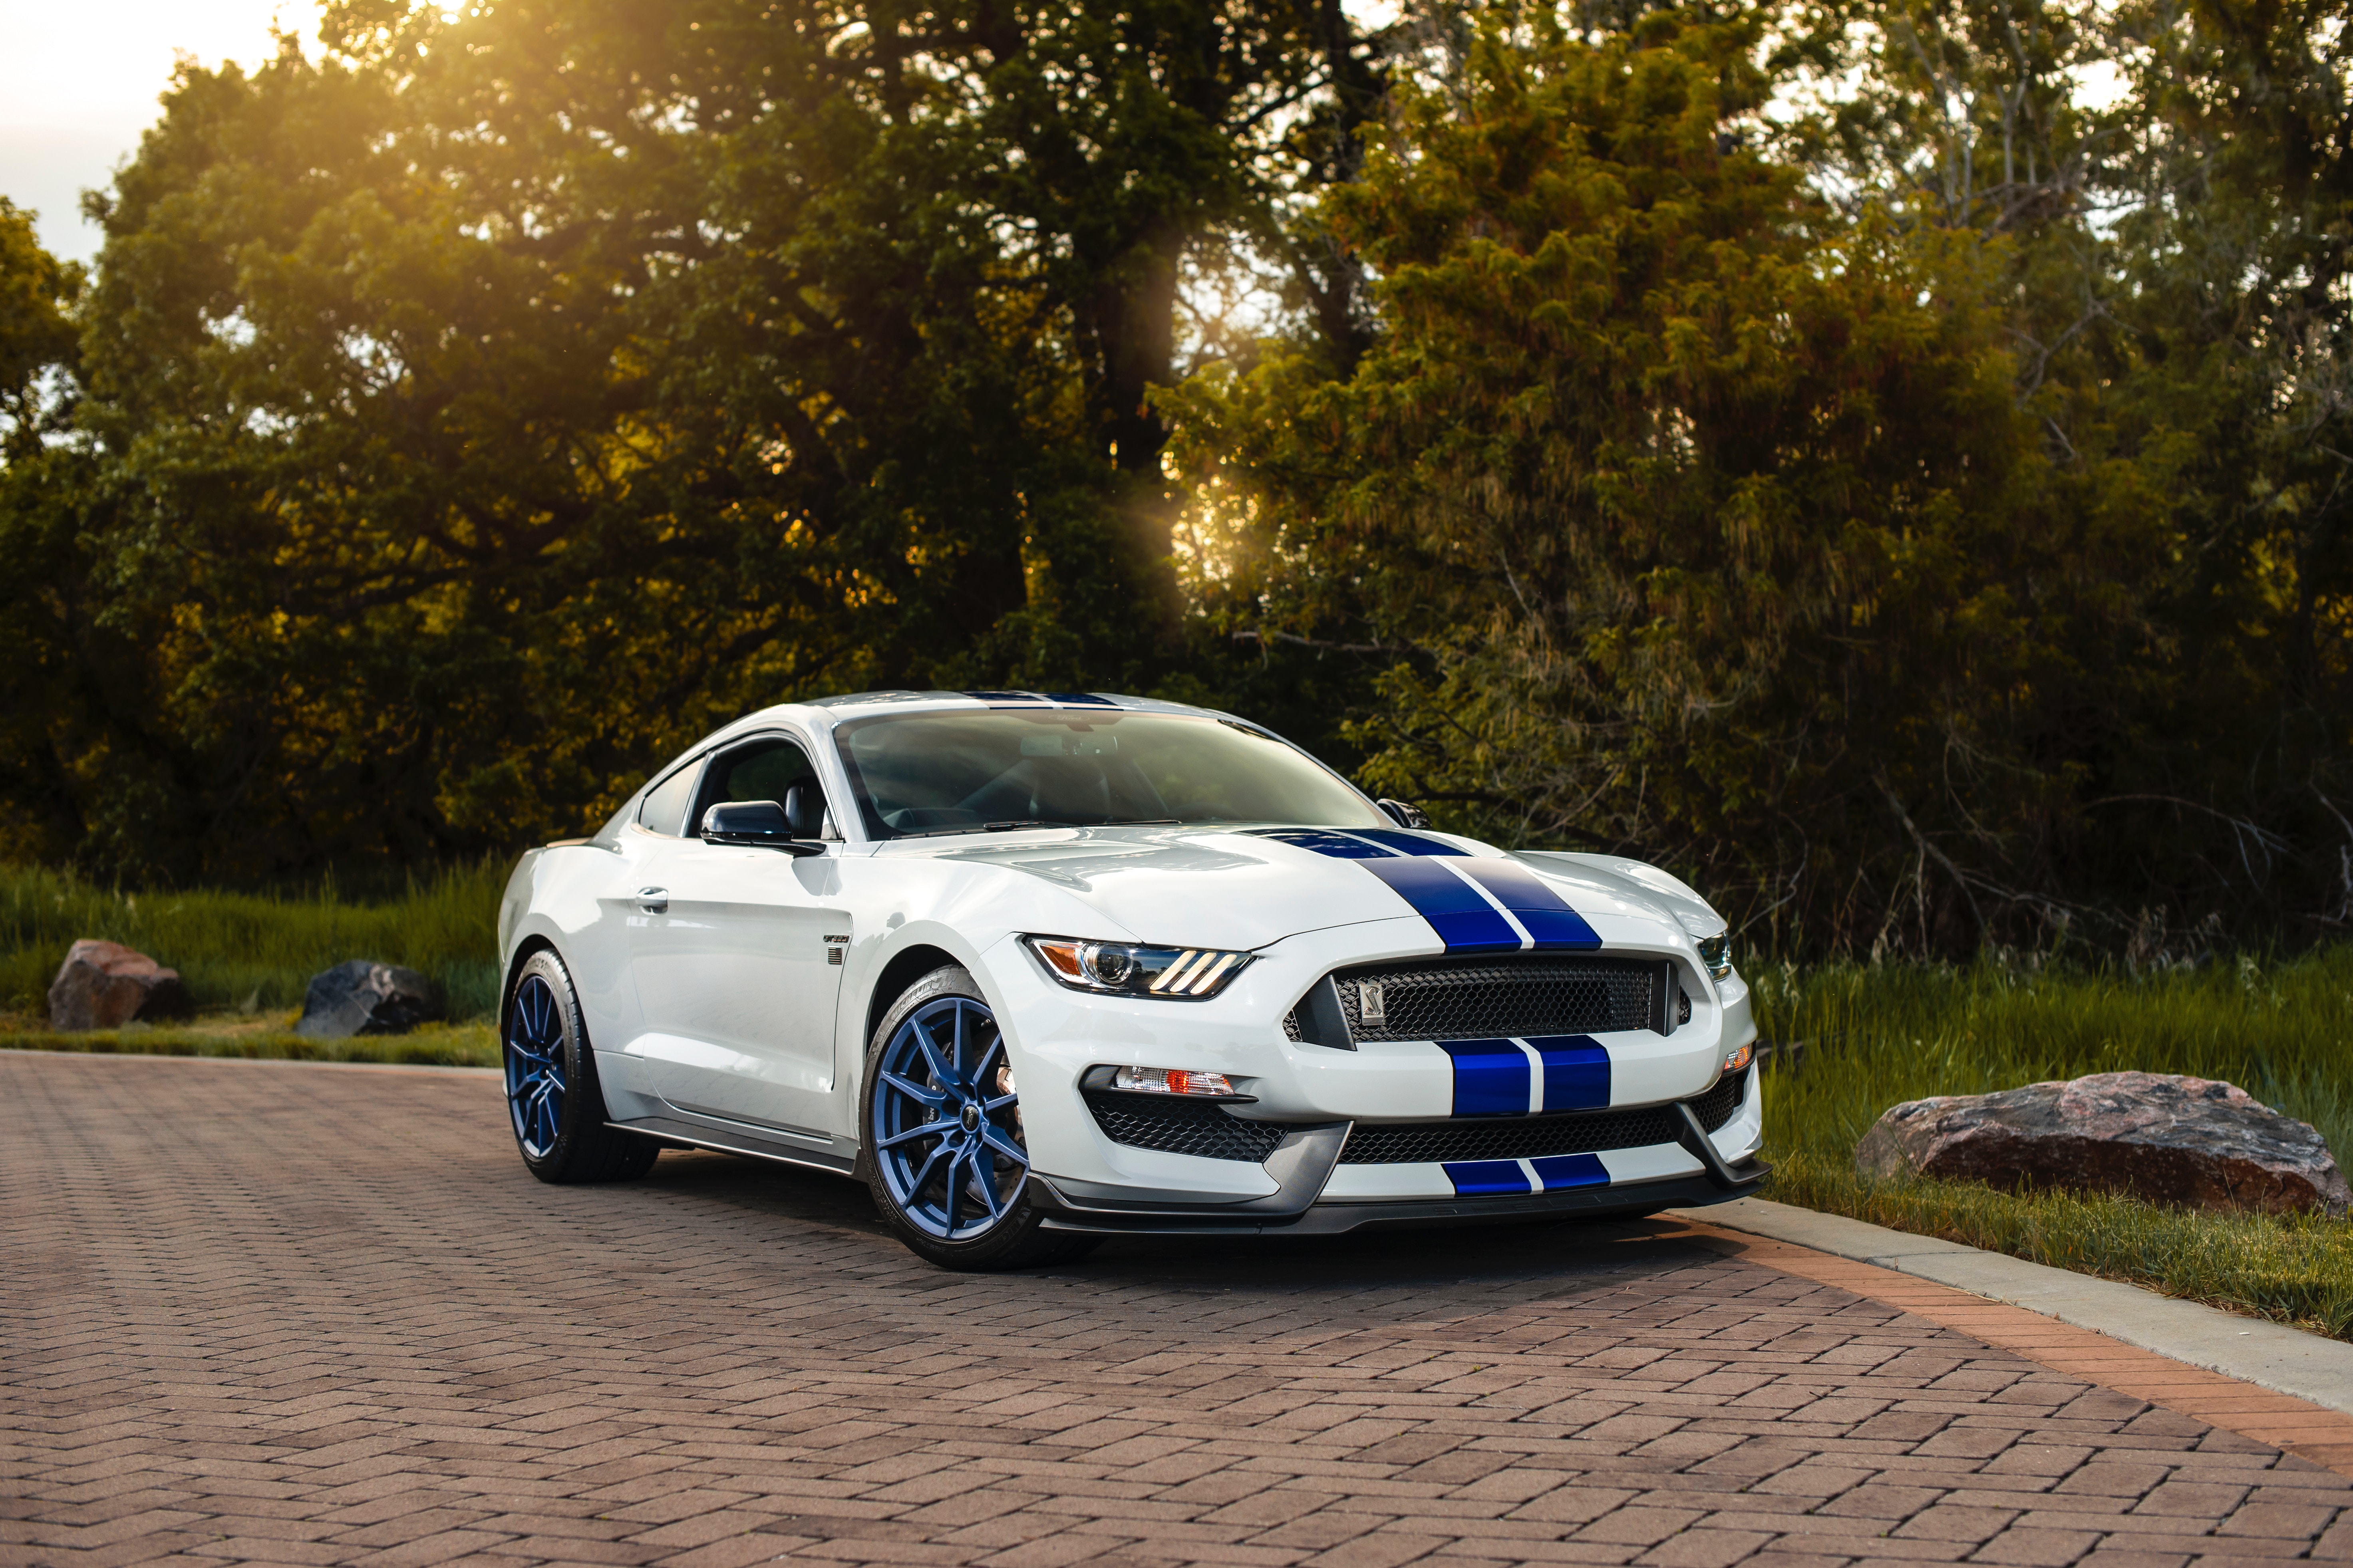 side view, ford mustang gt350, sports car, car, cars, white, sports, ford, machine